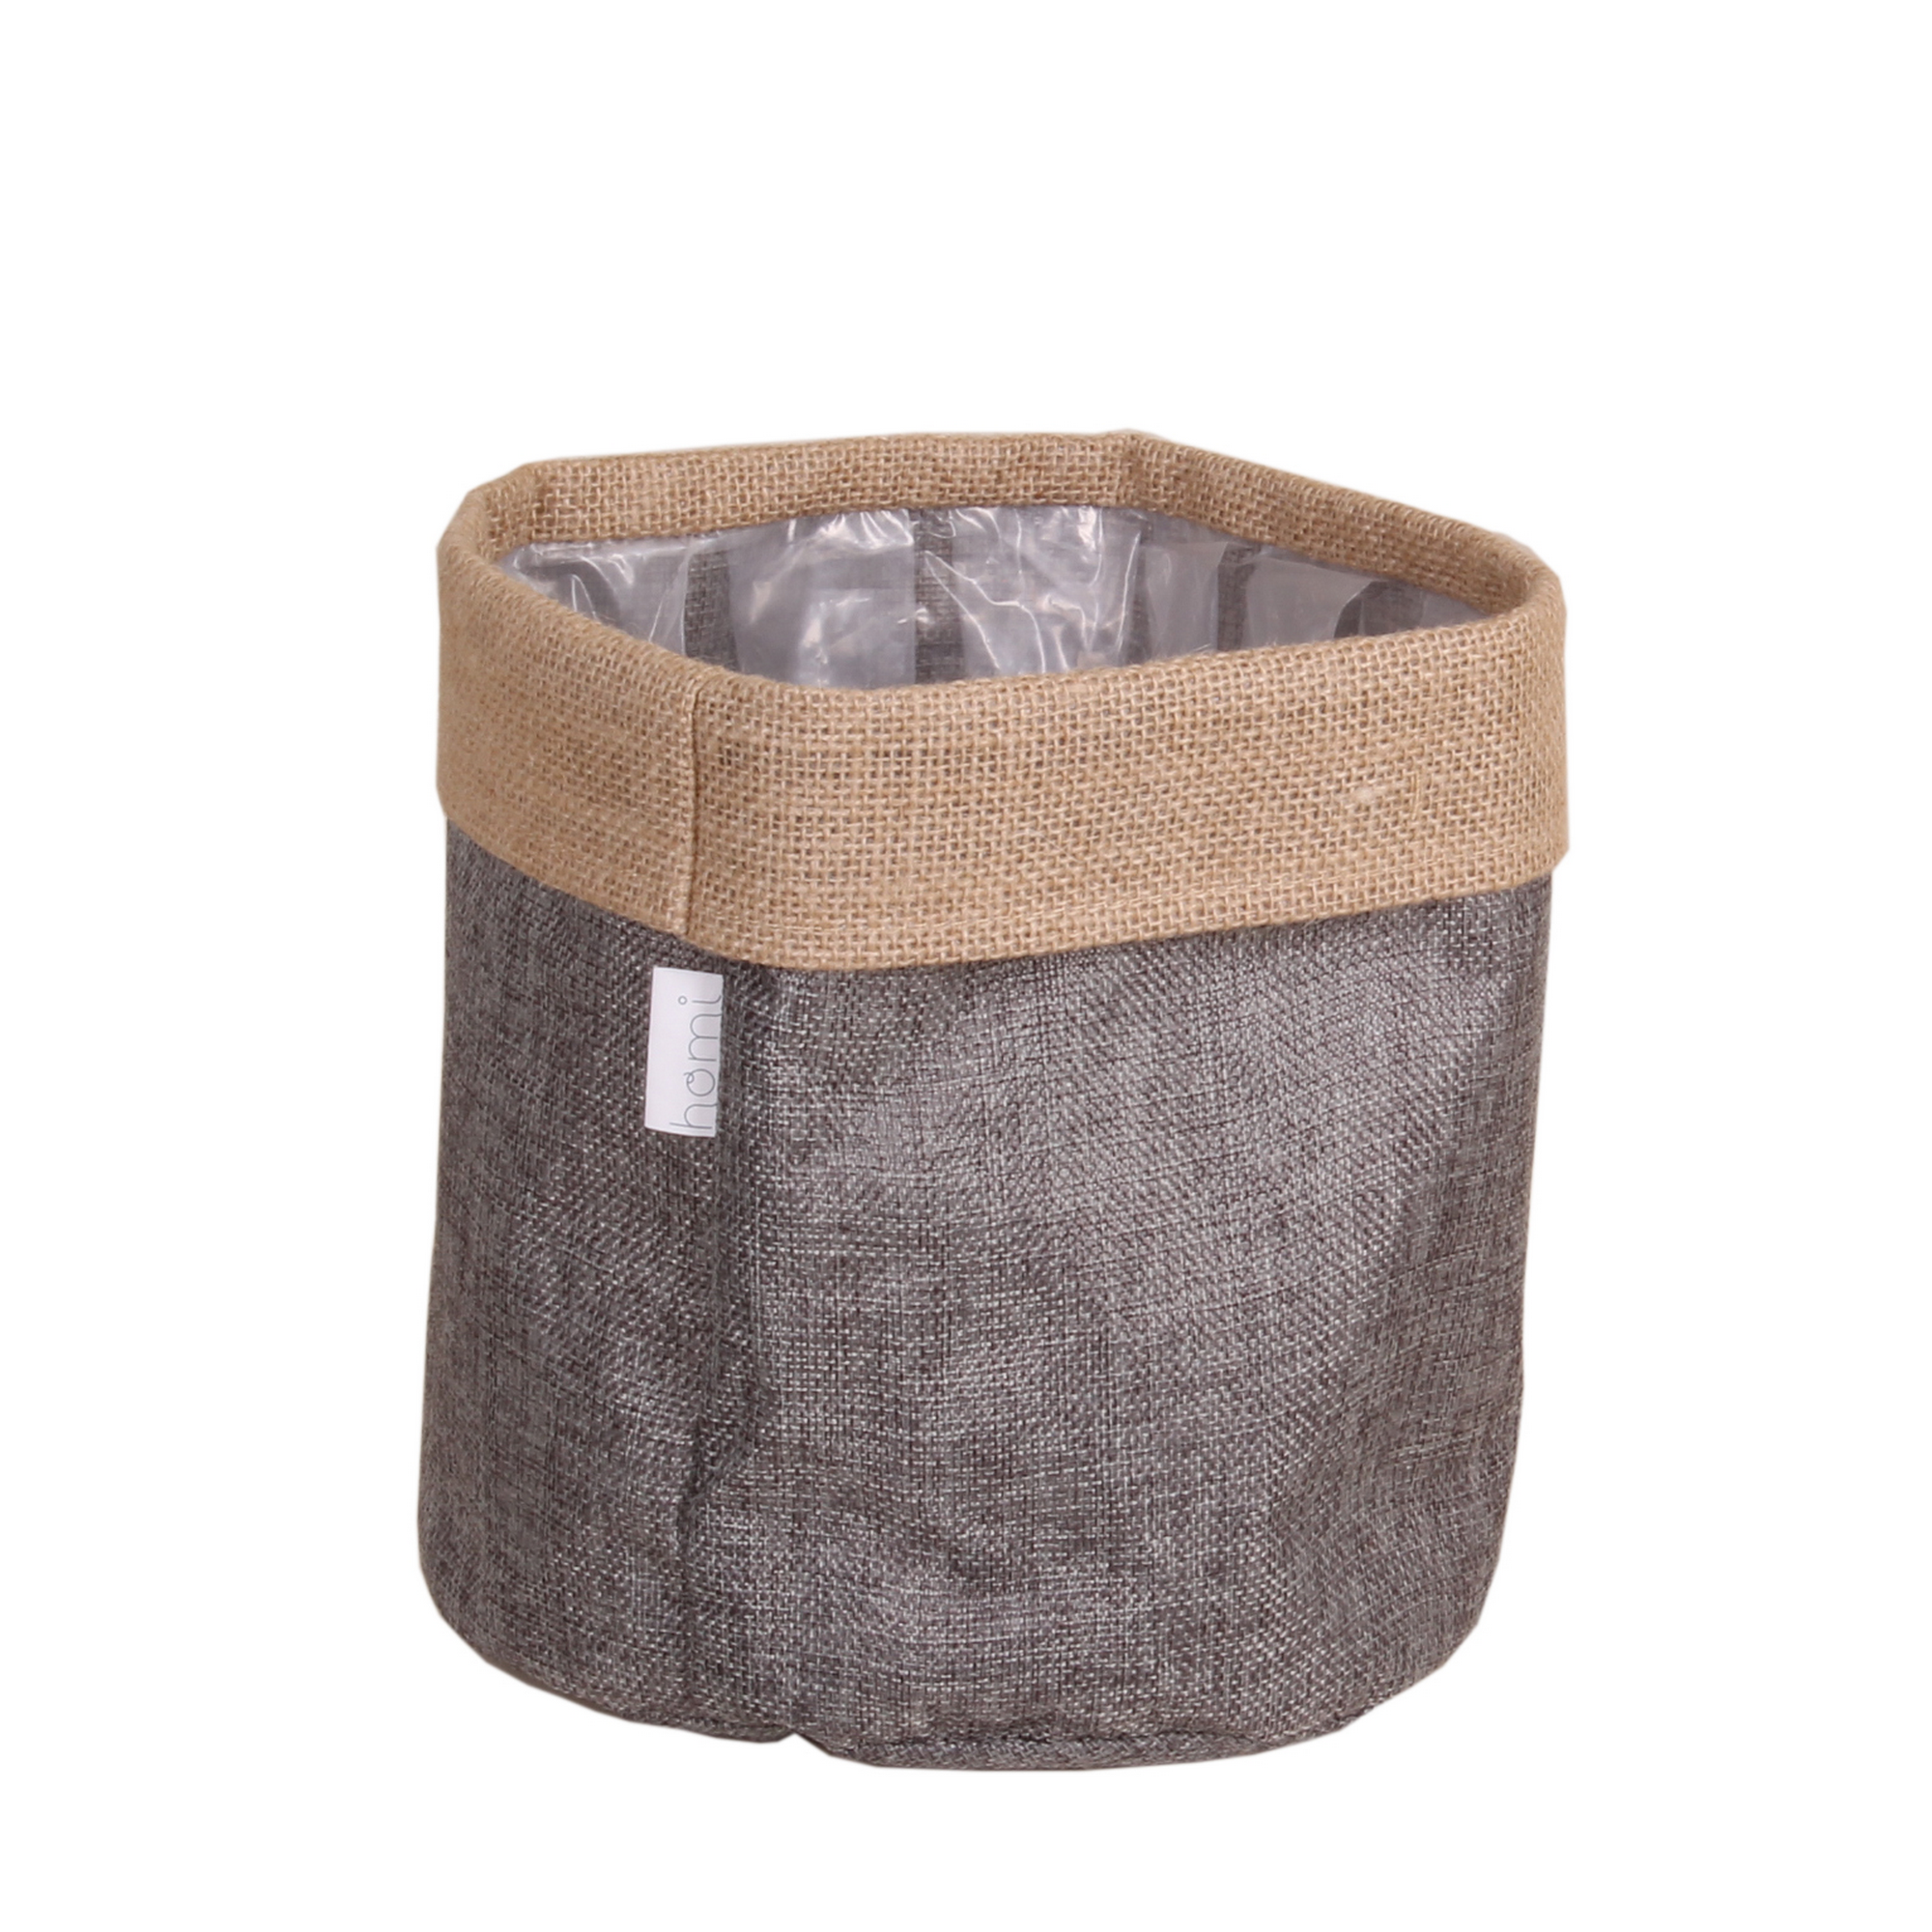 Pflanzkorb Jute/Polyester natur/grau Ø 15 x 15 cm + product picture